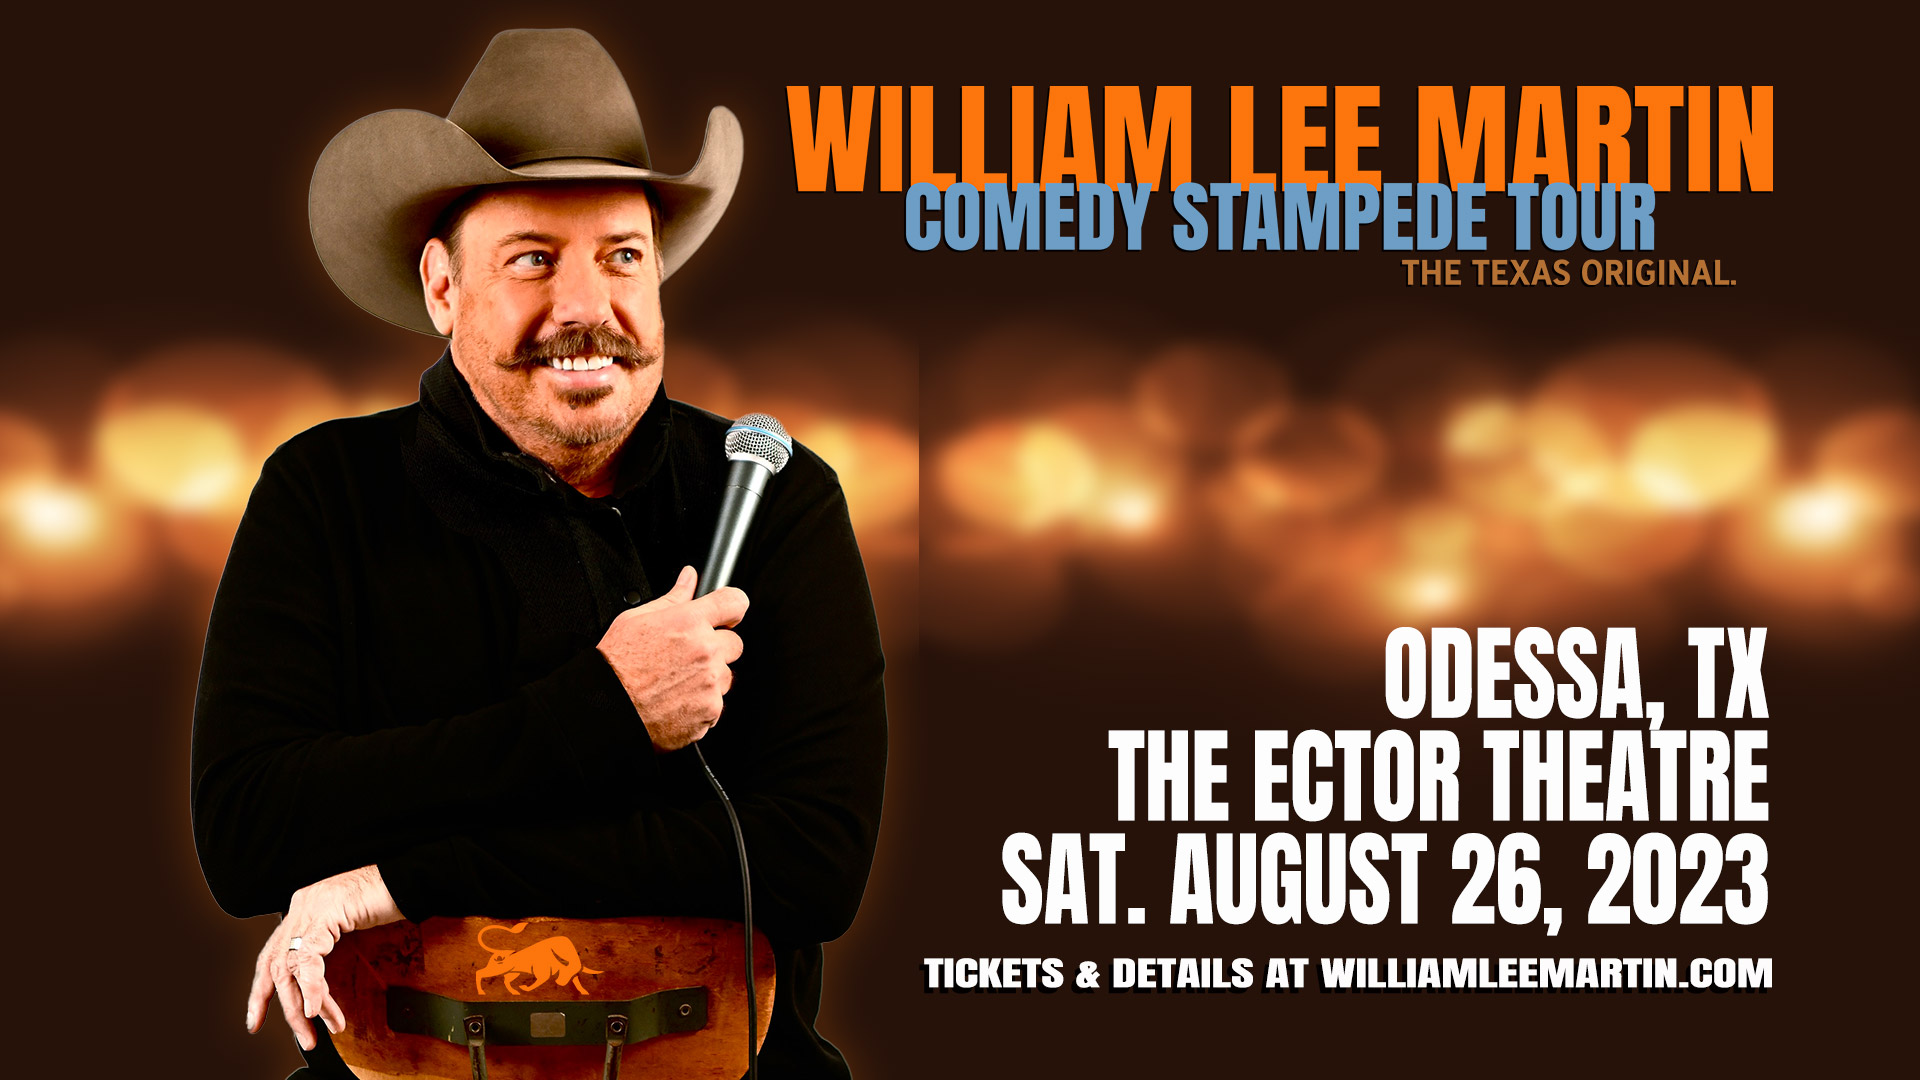 William Lee Martin's Comedy Stamped Tour in Odessa, TX on August 26, 2023